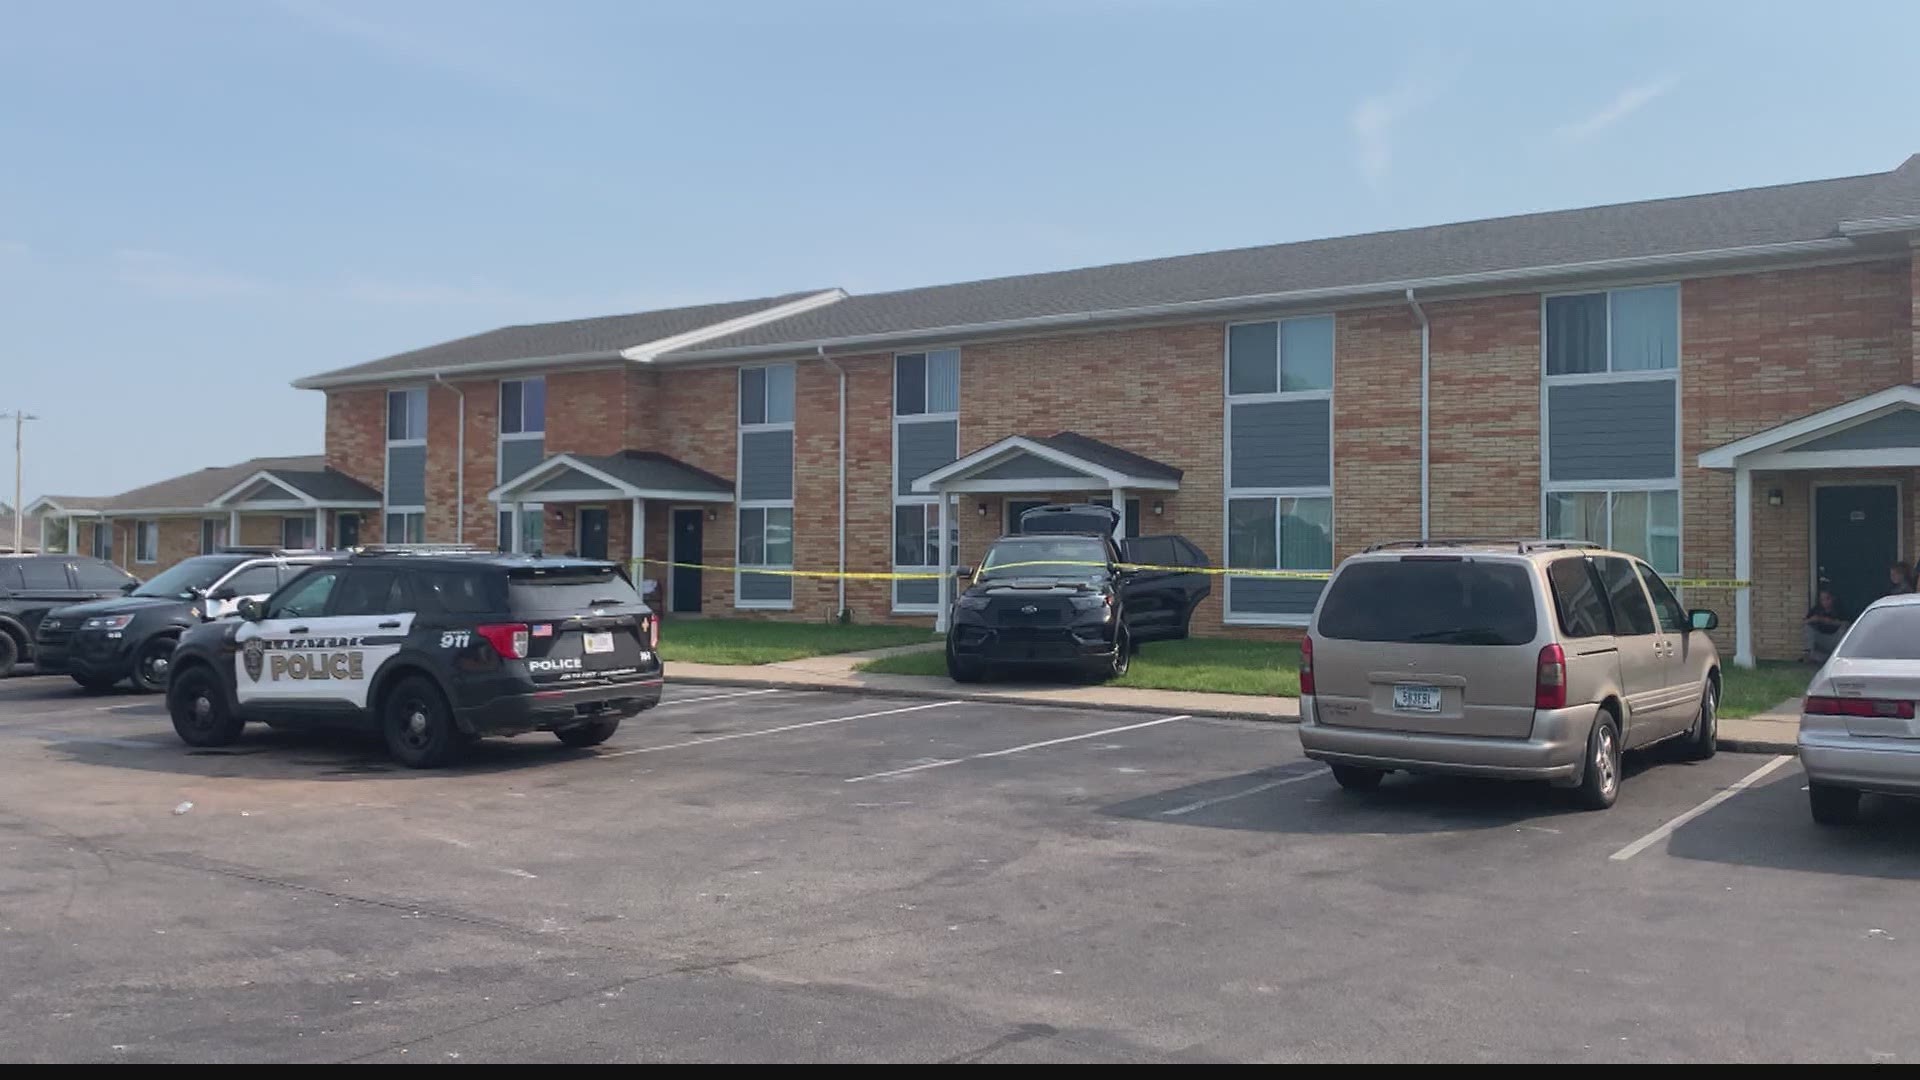 Two children were found dead in separate incidents.